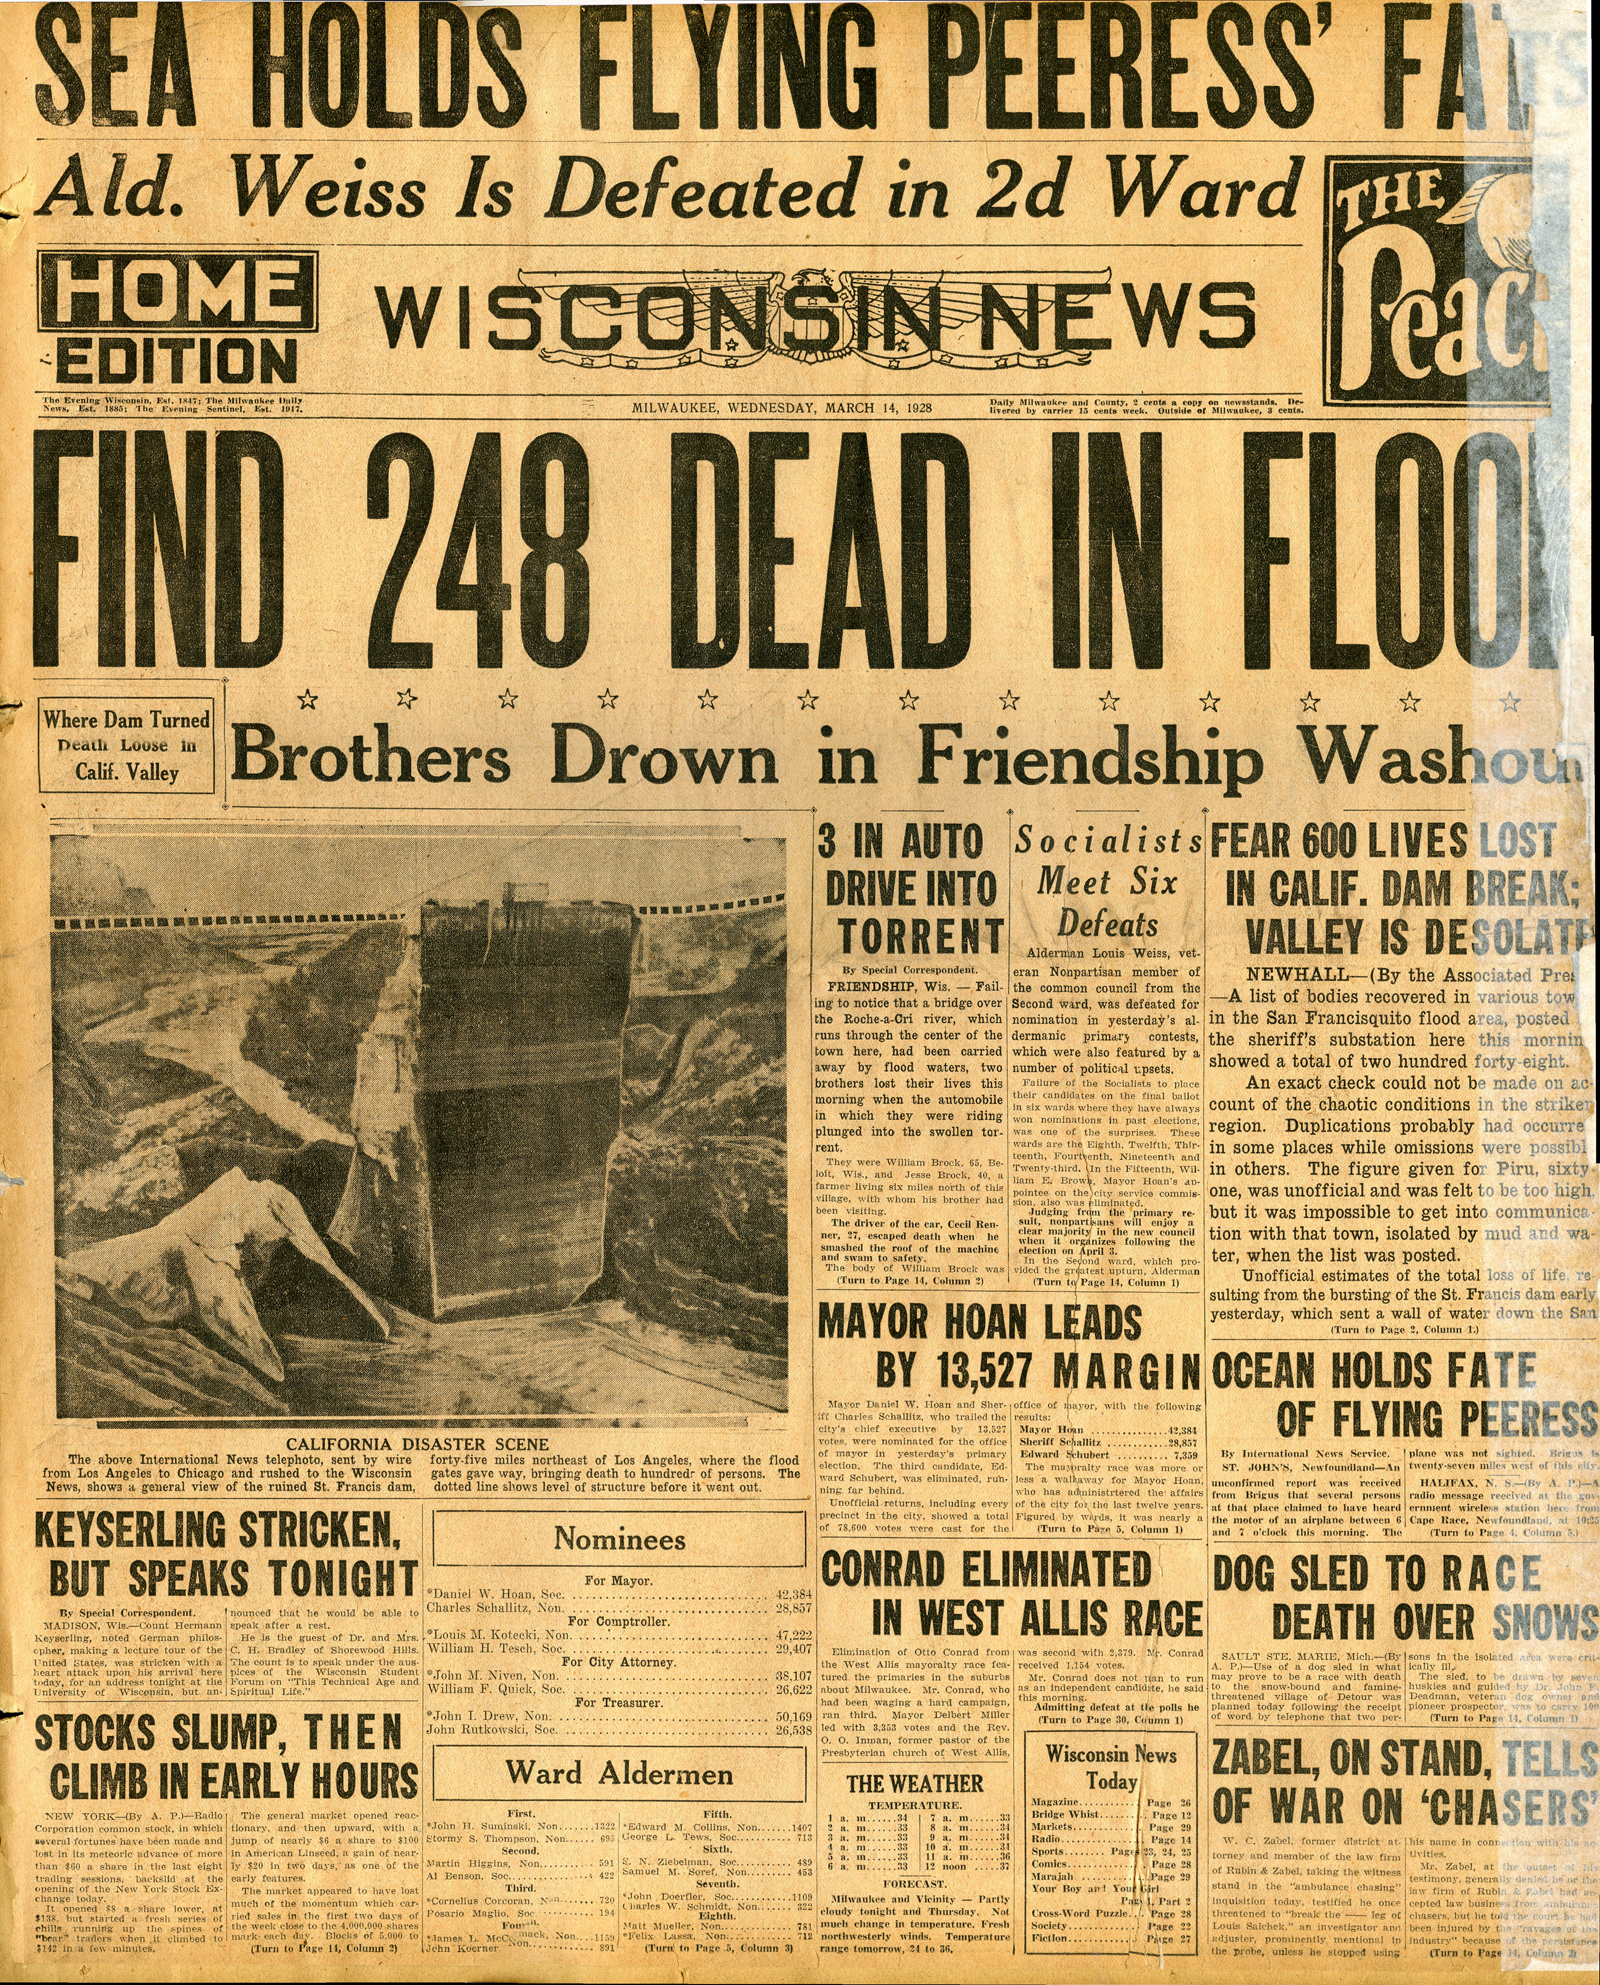 St. Francis Dam Disaster.

WISCONSIN NEWS (NEWSPAPER),

WEDNESDAY, MARCH 14, 1928